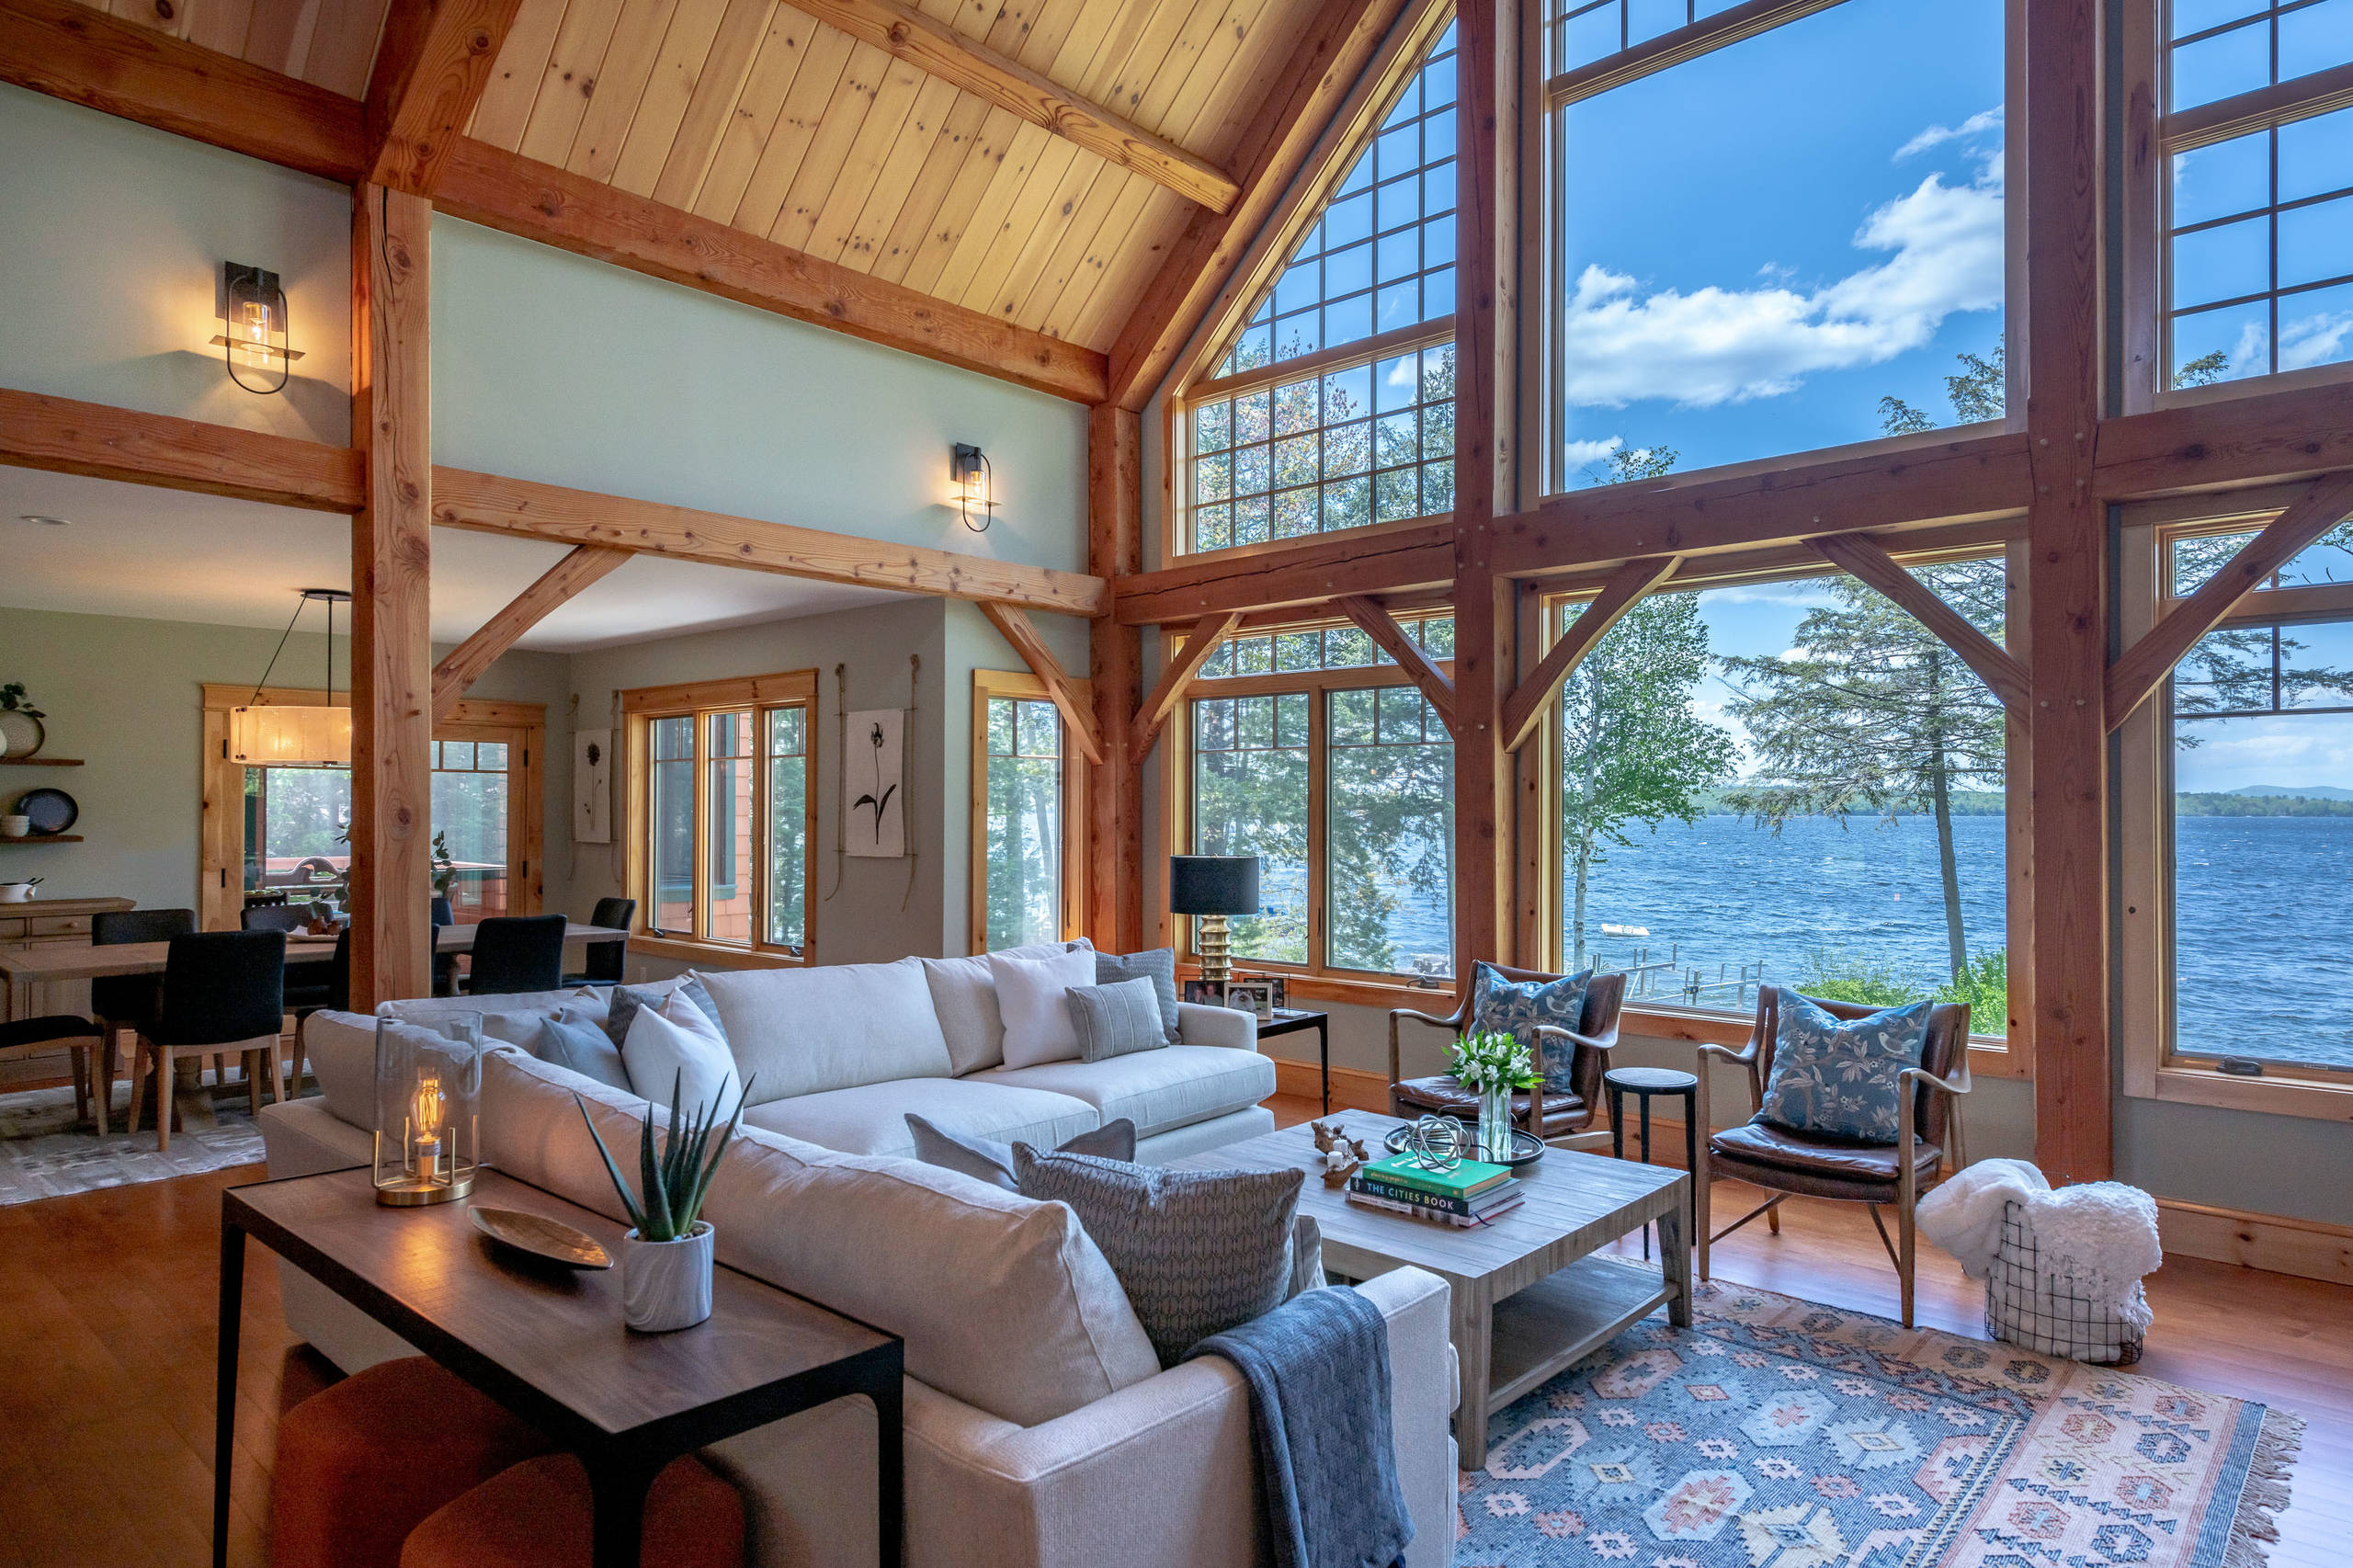 Upon entering the home you notice the soaring wood architecture with floor to ceiling windows, providing incredible views to the lake. The living room is comfortable and sophisticated with plenty of s